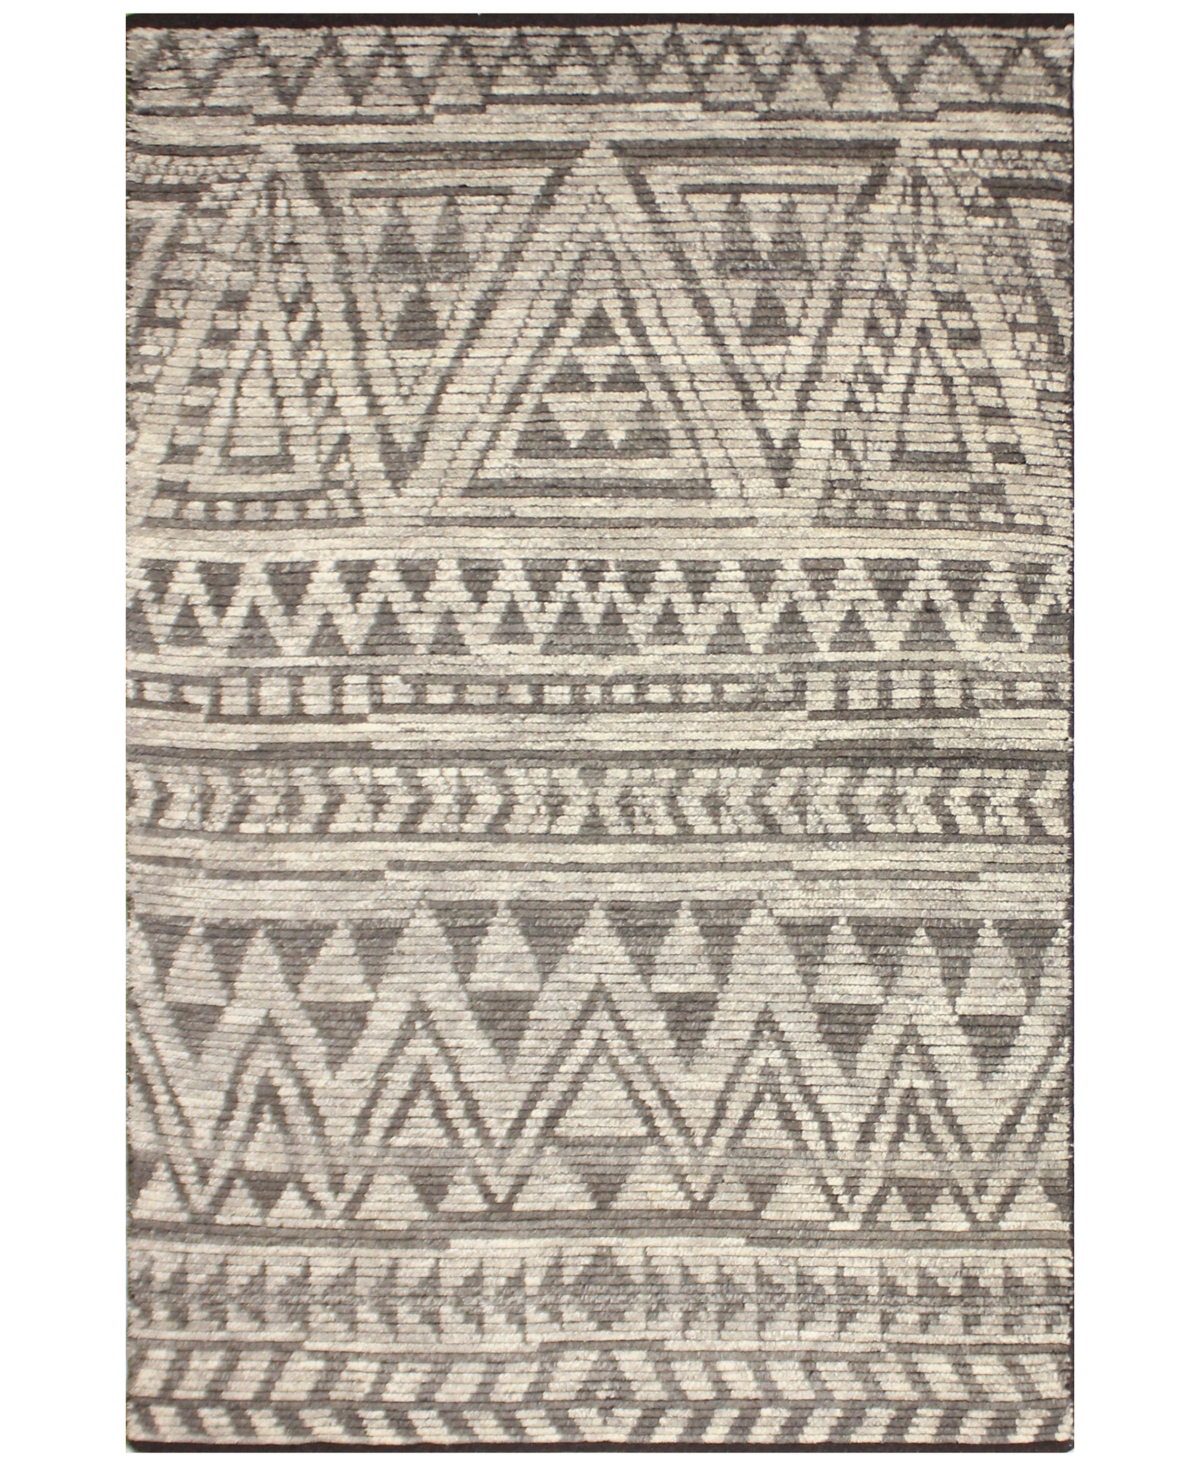 Bb Rugs Natural Wool Nat-21 Gray 2'6in x 8' Runner Area Rug - Grey